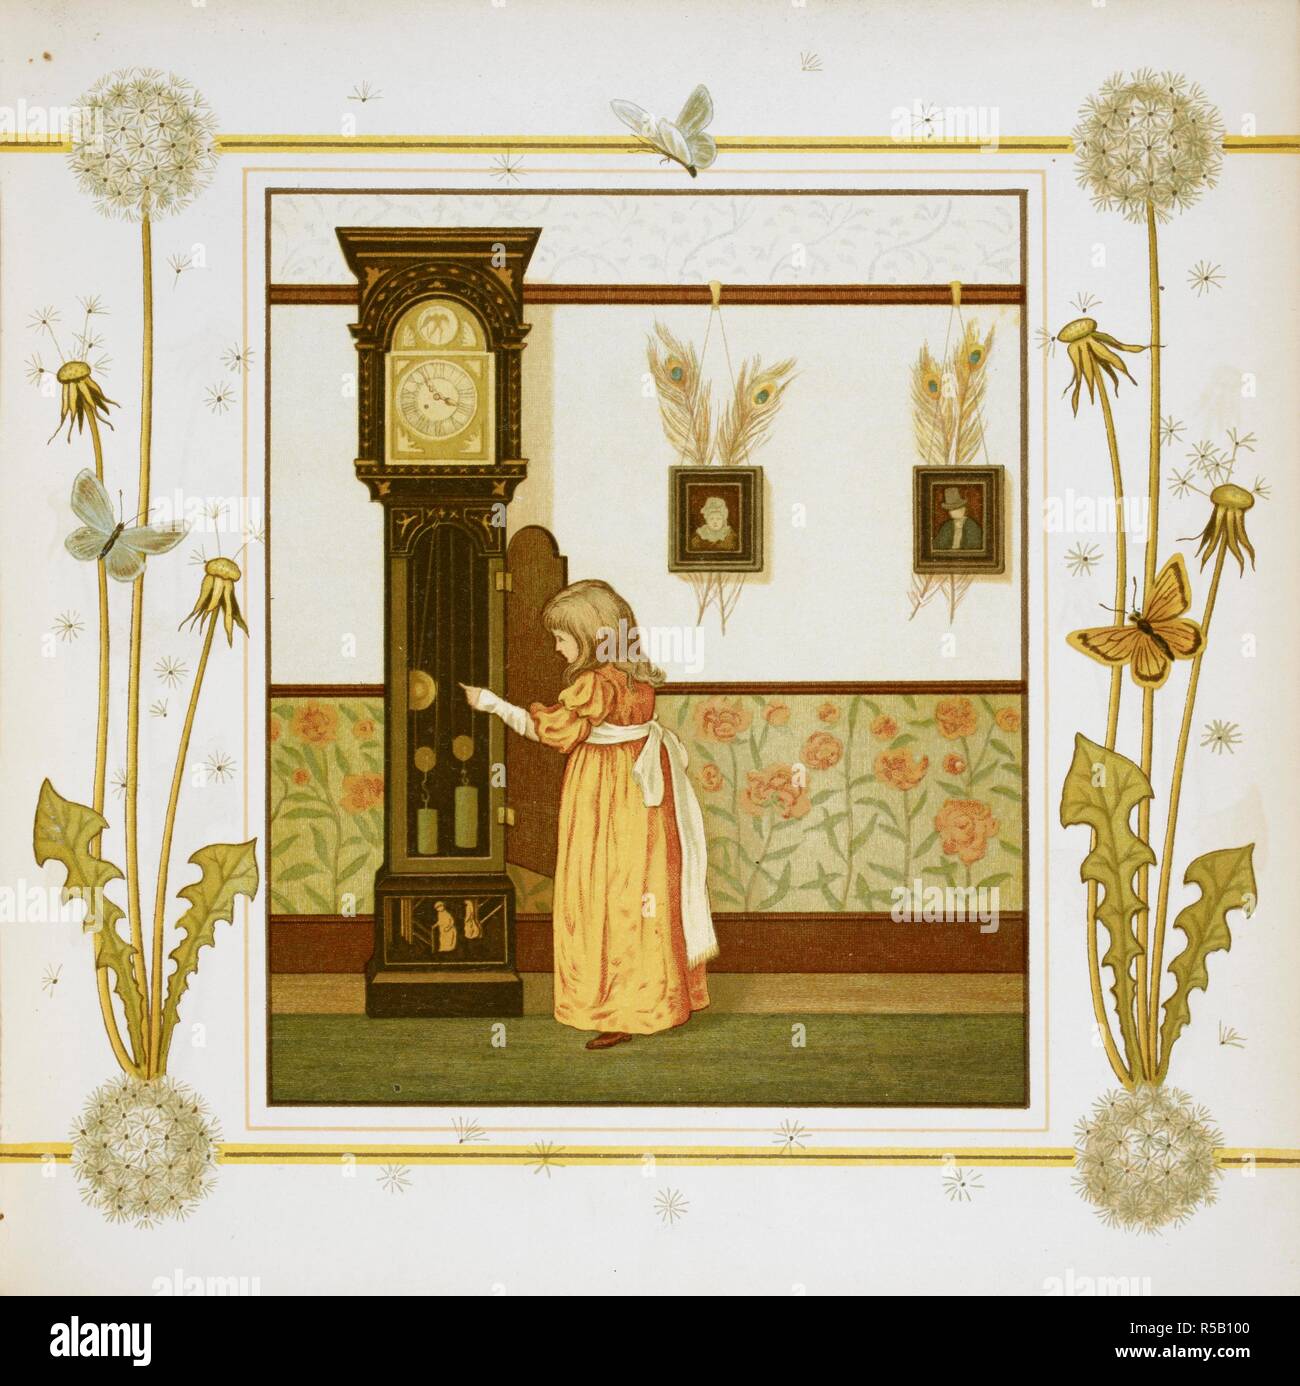 A girl wearing an orange dress, adjusts a grandfather clock. At Home again. Verses. [Illustrated by] J. G. Sowerby and T. Crane. London : Marcus Ward & Co., [1886]. Source: 12806.t.30, page 21. Author: Sowerby, John: Crane, T. Stock Photo